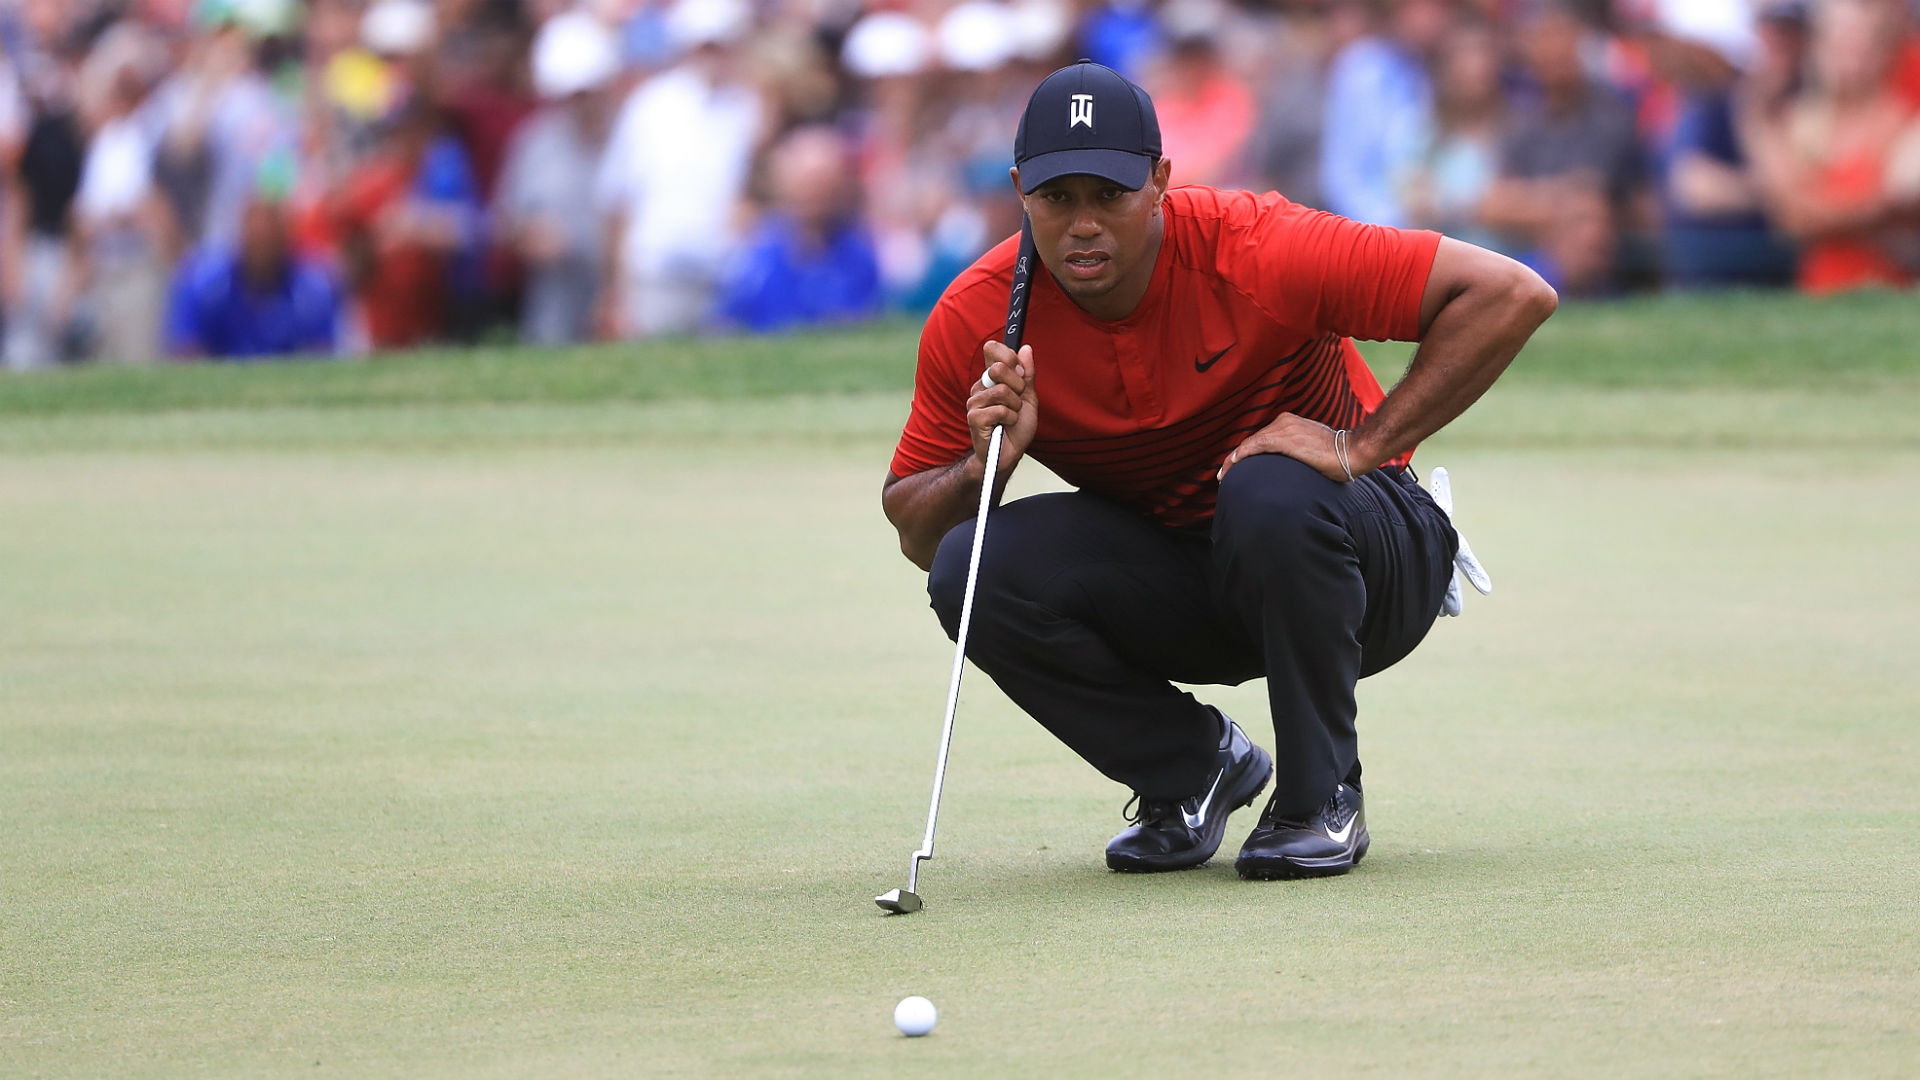 Tiger Woods, I Love You - Tiger Woods Reading Putt , HD Wallpaper & Backgrounds